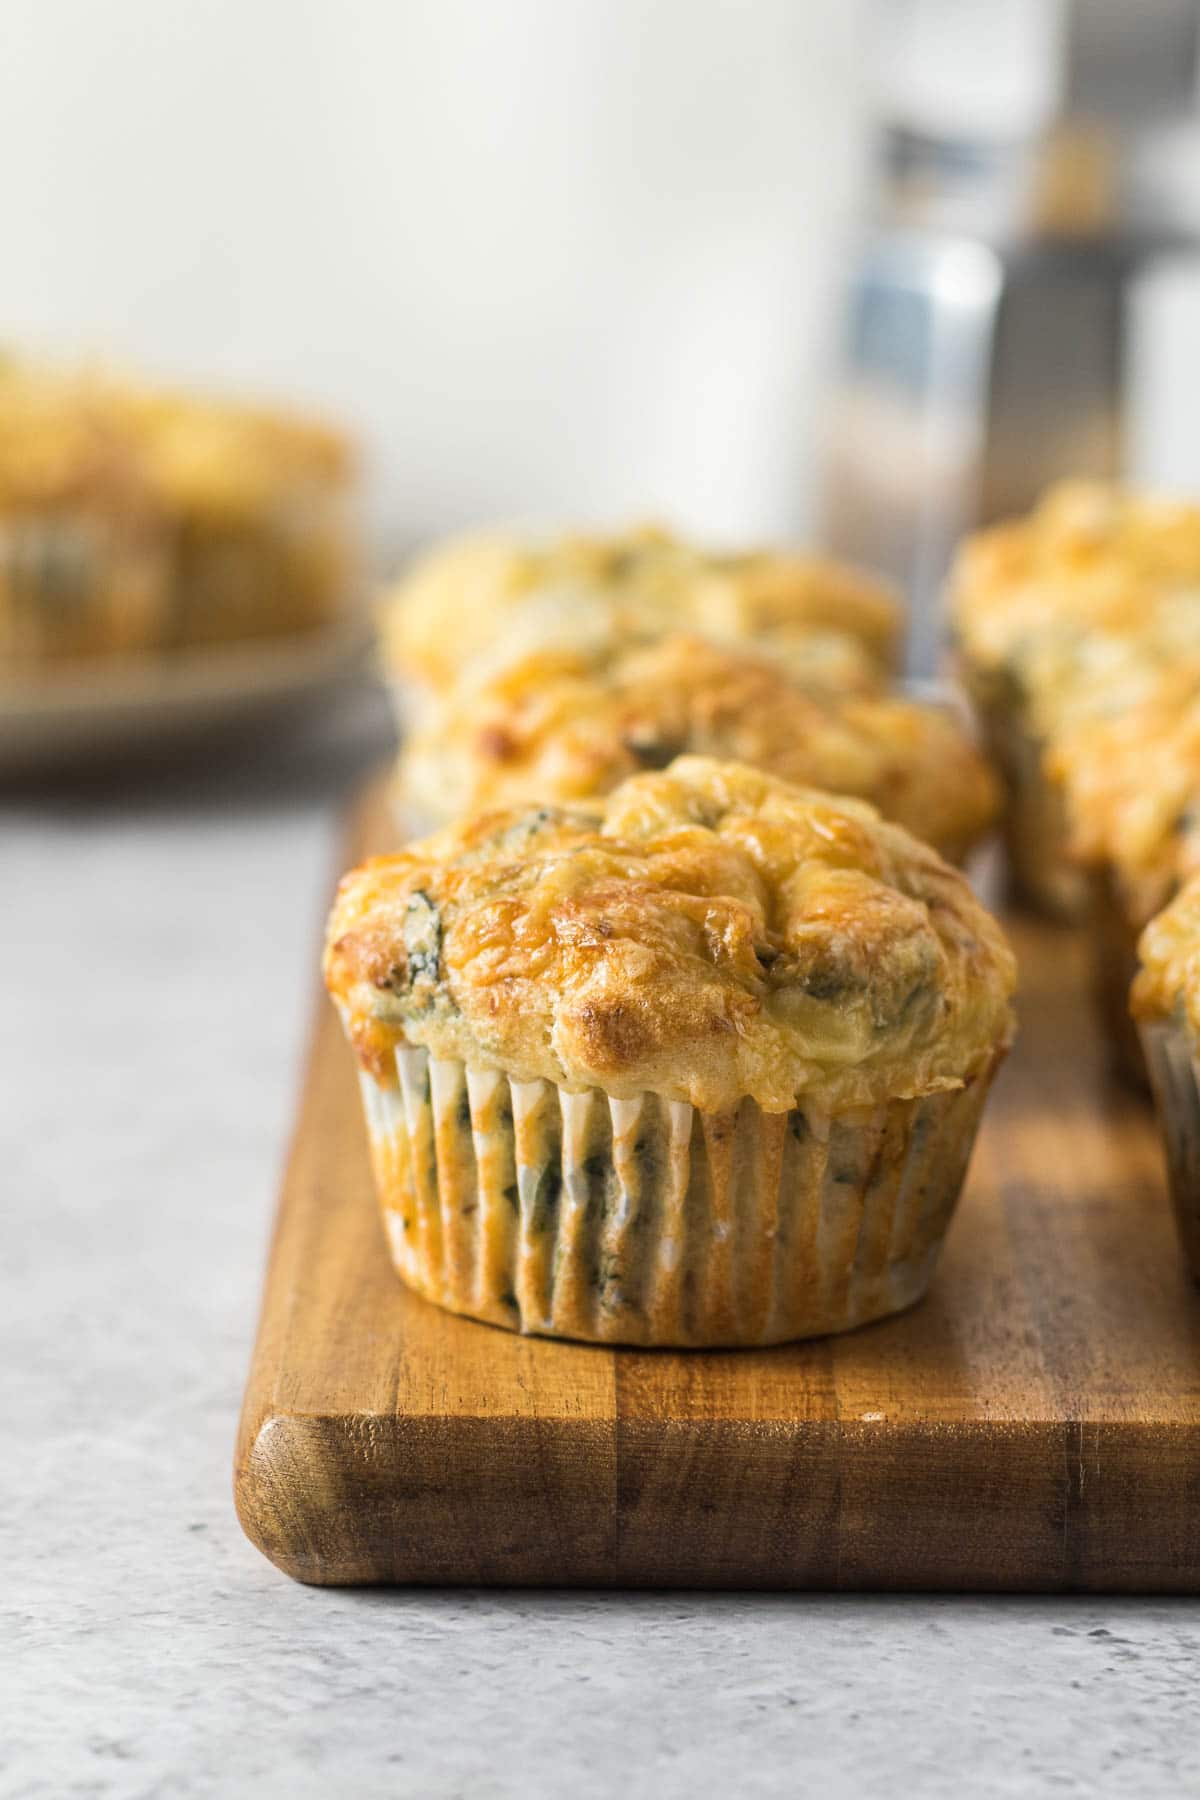 Feta and spinach muffins on a wooden board.